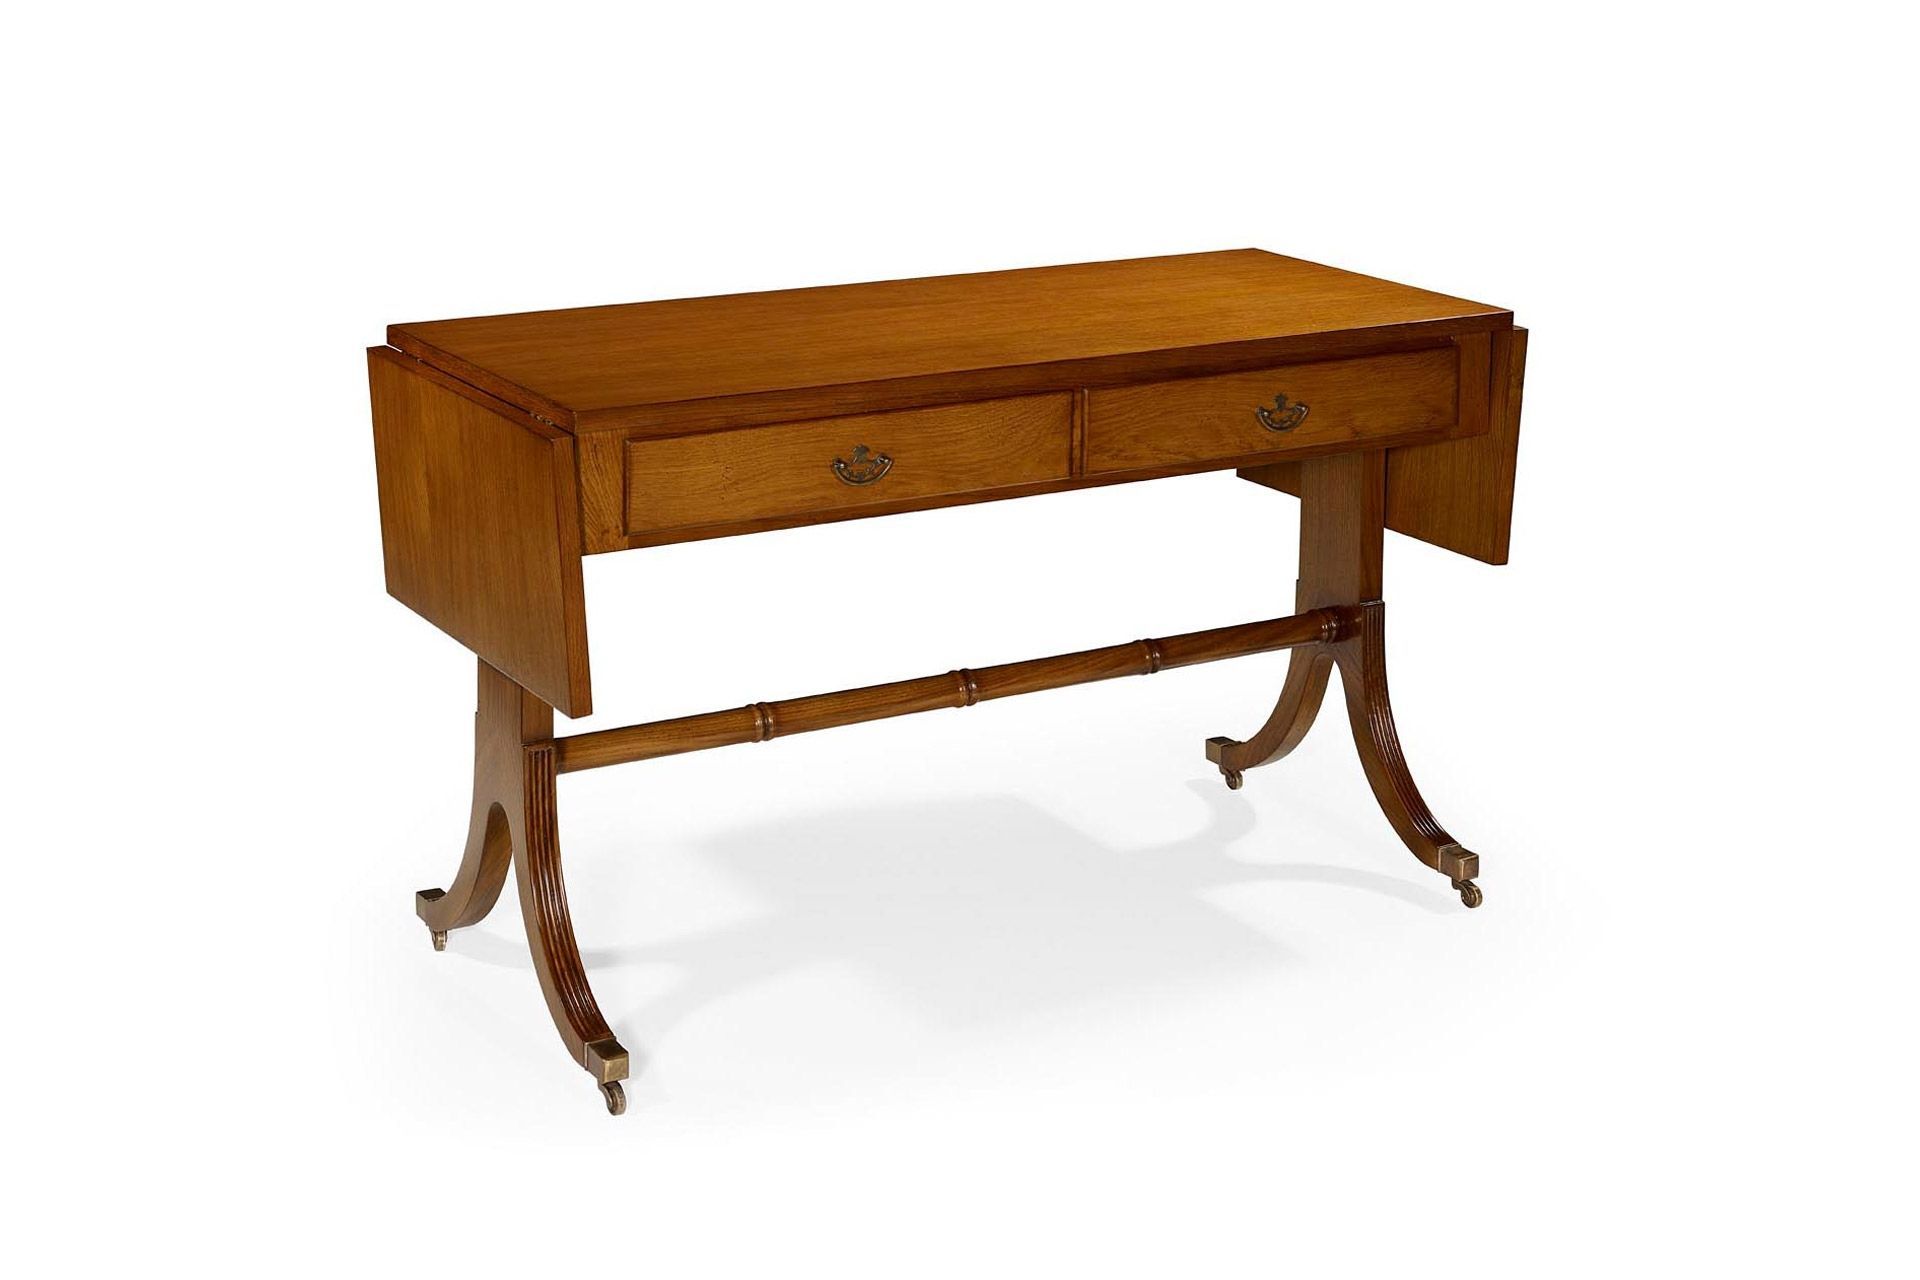 Berkeley Is A Classic Console Table With Extension Leaves Throughout Console Tables With Tripod Legs (View 17 of 20)